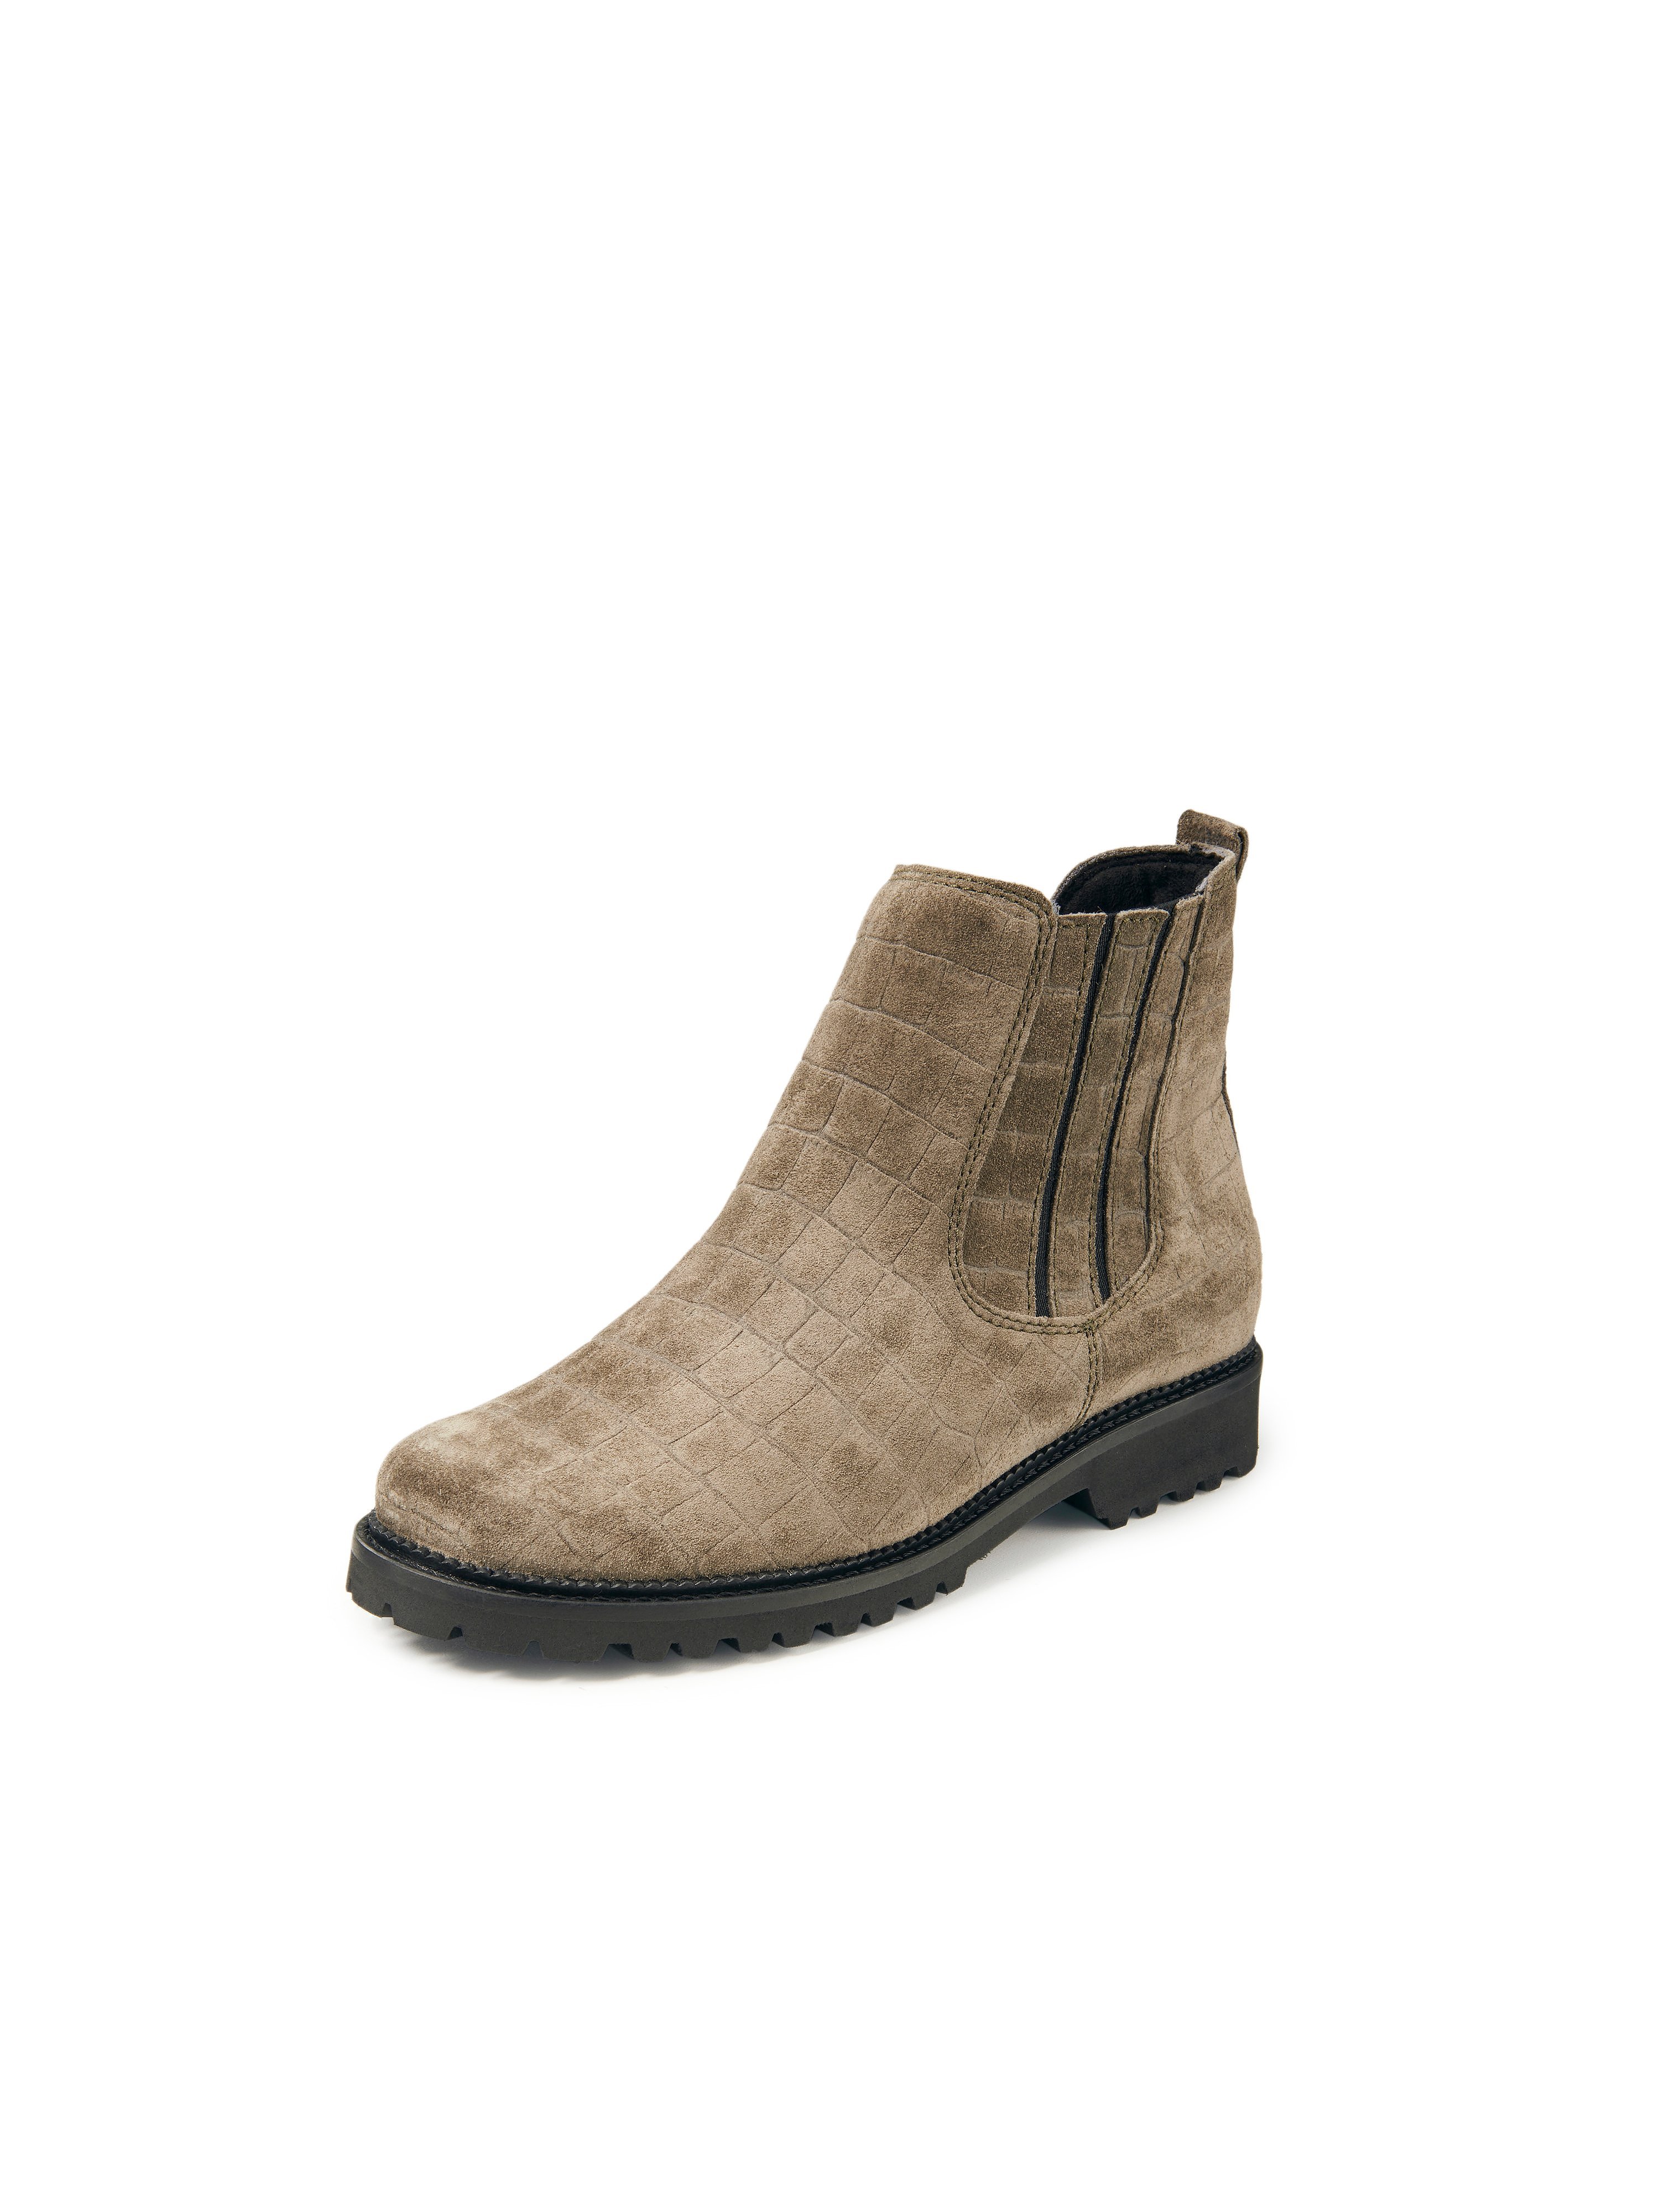 Chelsea boots in calf suede leather Christian Dietz beige